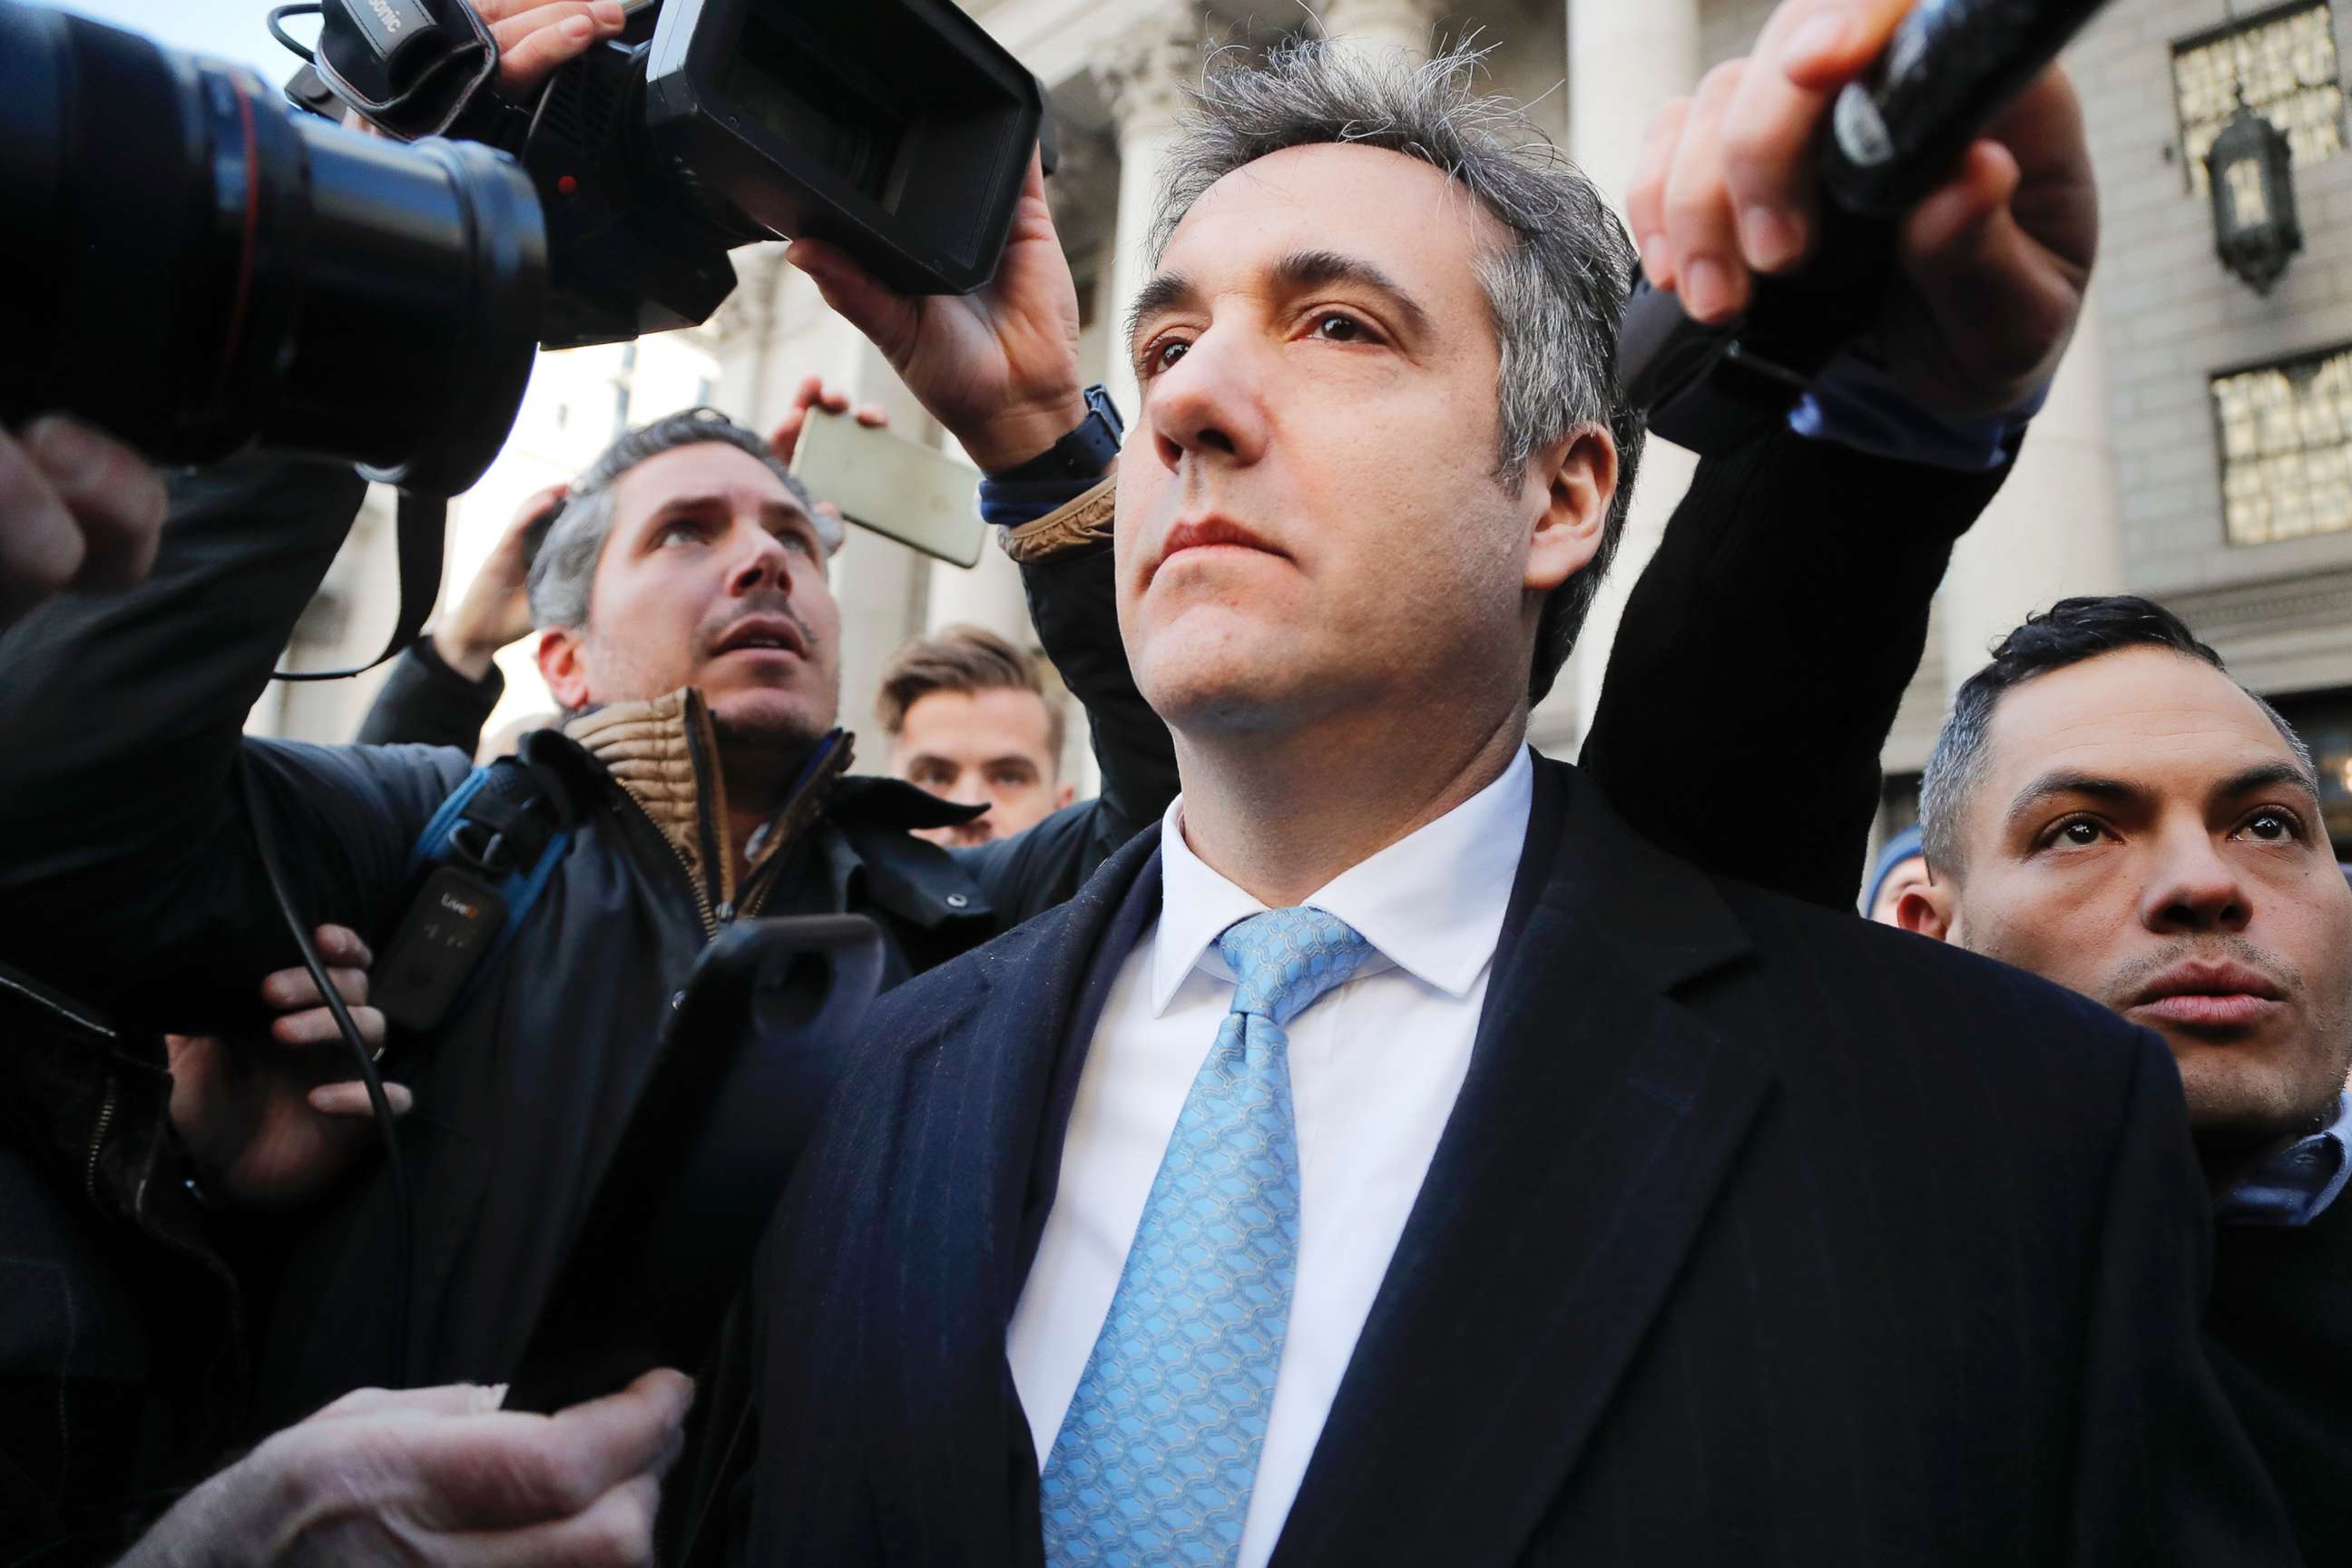 PHOTO: Michael Cohen walks out of federal court, Nov. 29, 2018, in N.Y.